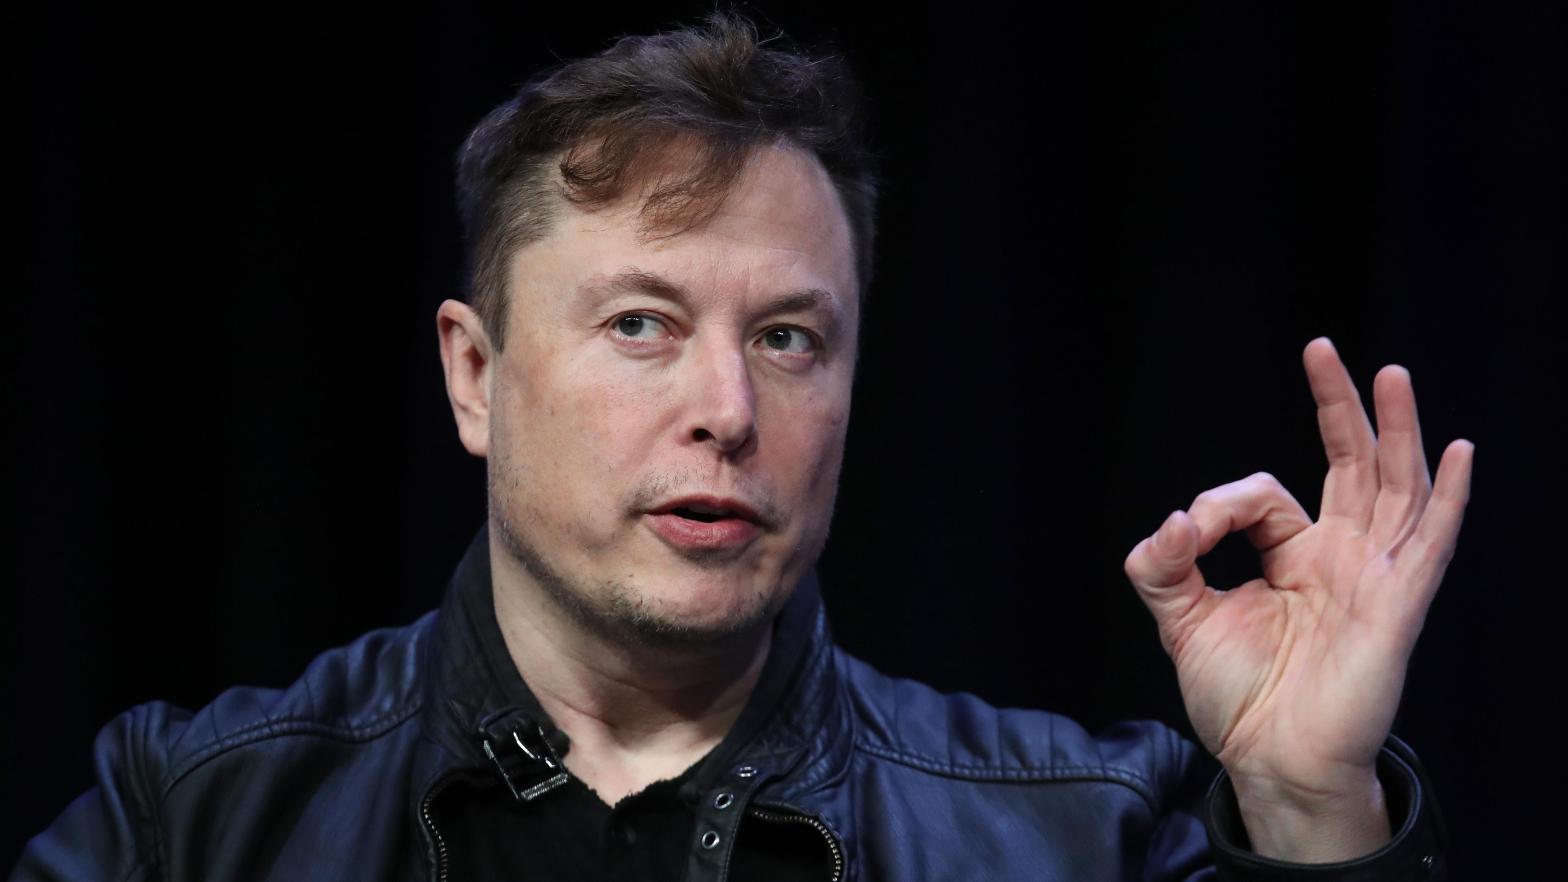 A leaked email from Musk says that executive employees can work remotely...after at least 40 hours of in-office work. (Photo: Win McNamee, Getty Images)